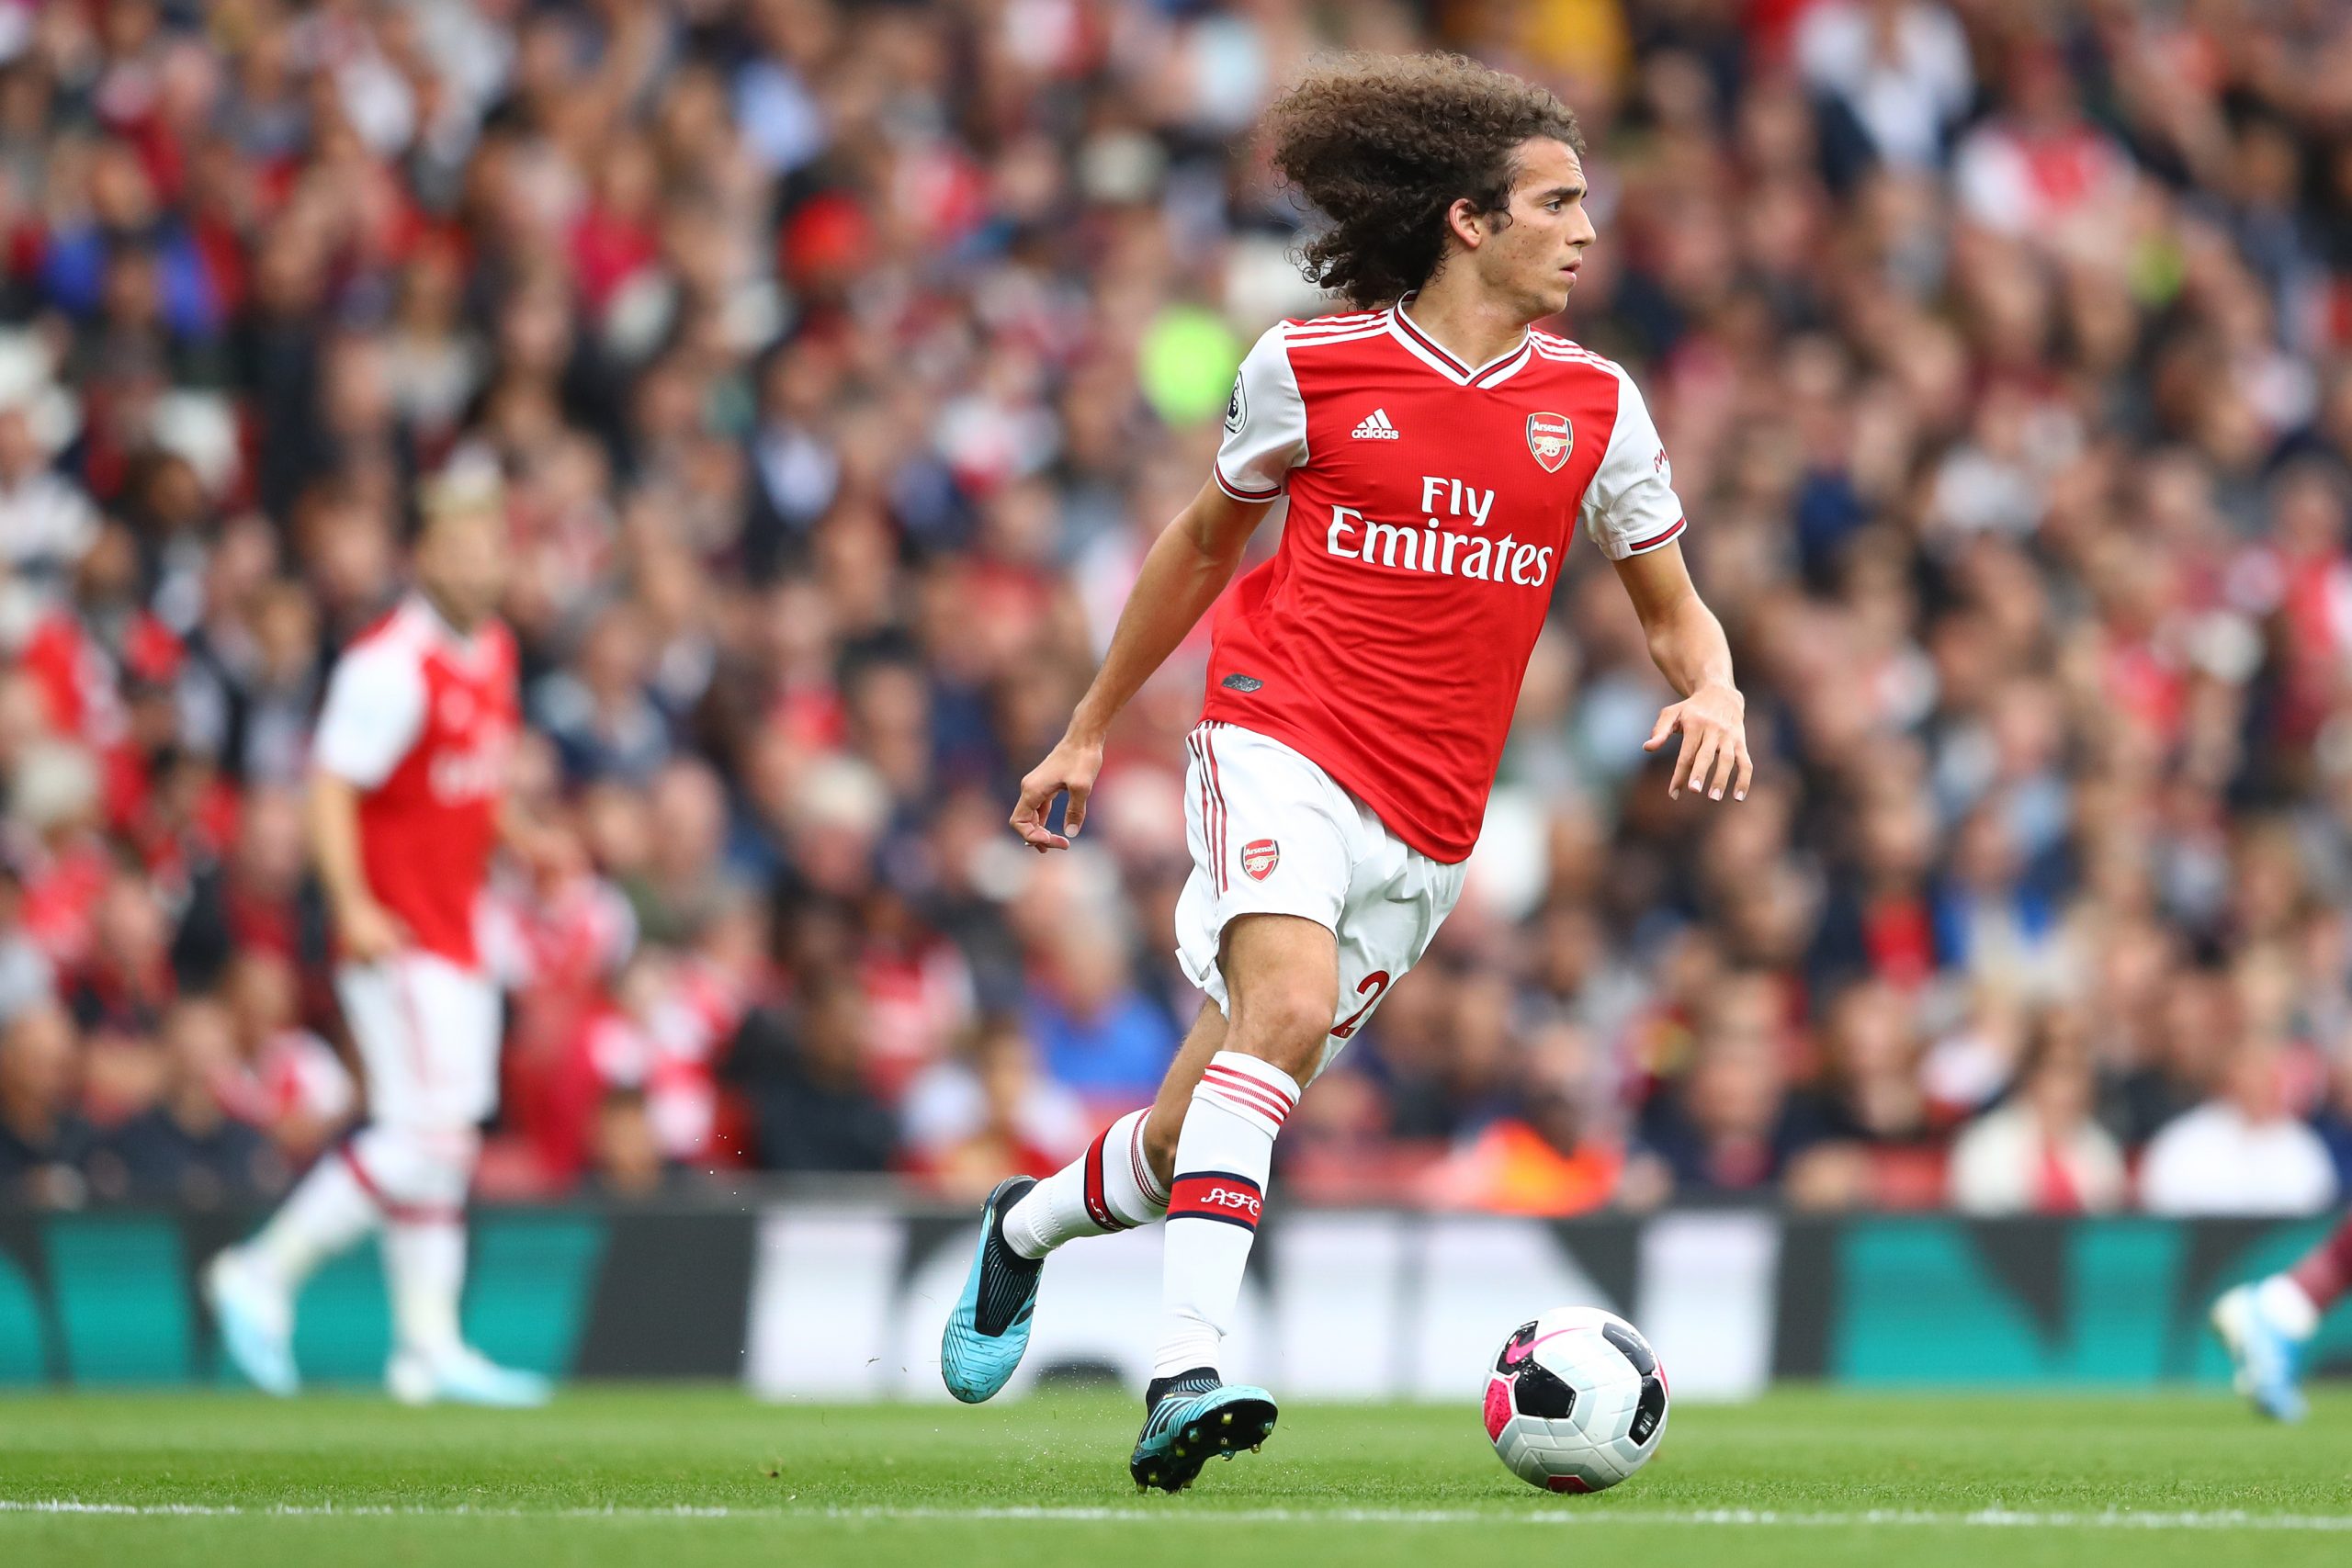 PSG are ready to rival Real Madrid in pursuit of Matteo Guendouzi - An ideal signing?